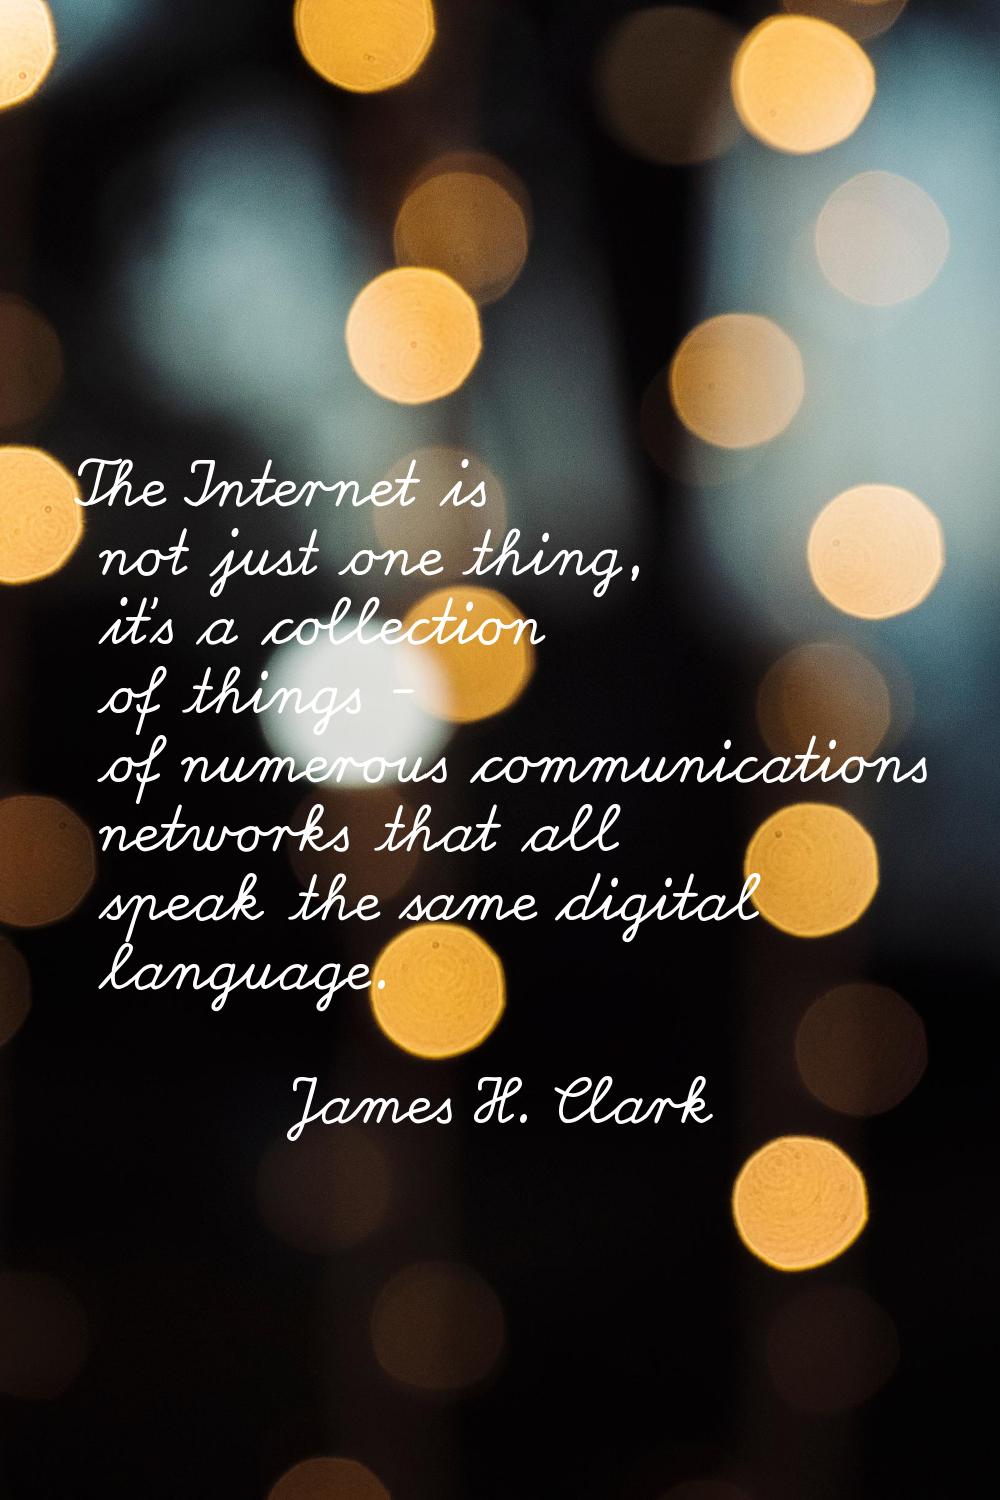 The Internet is not just one thing, it's a collection of things - of numerous communications networ